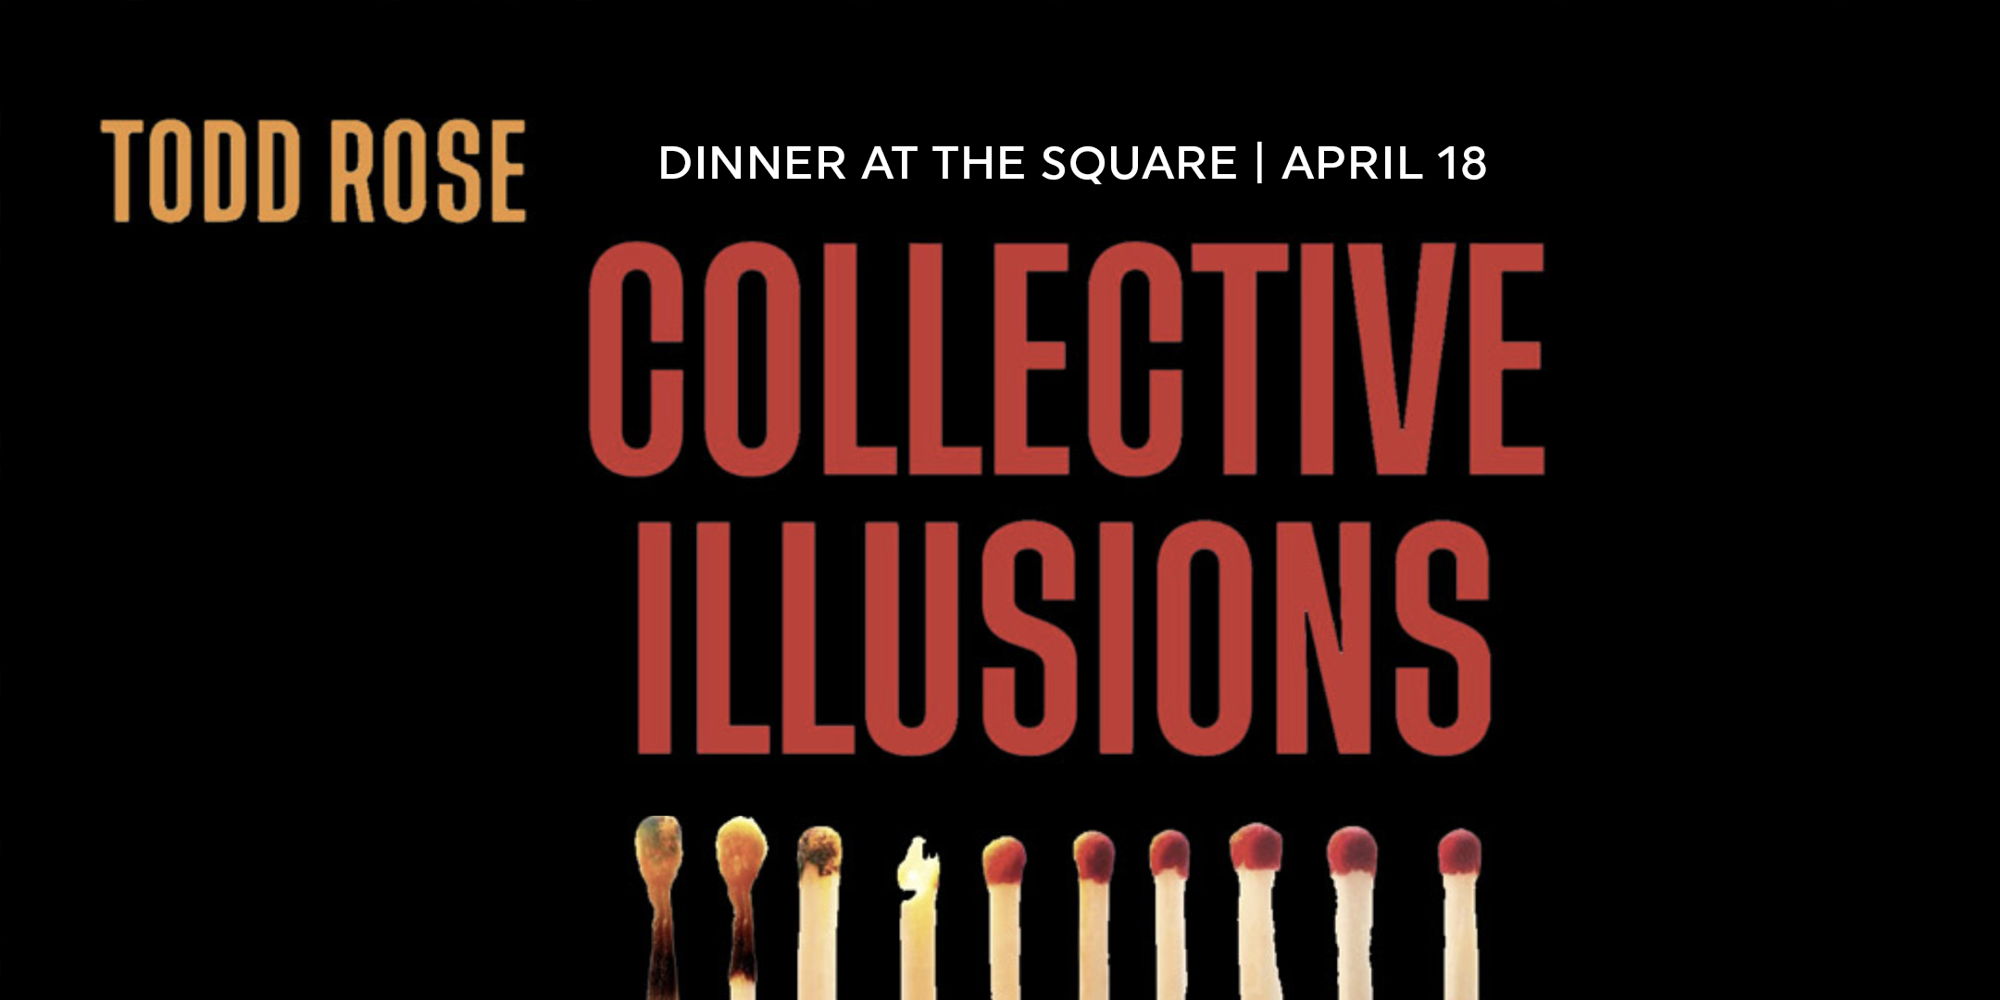 Dinner at the Square: Collective Illusions with Todd Rose promotional image